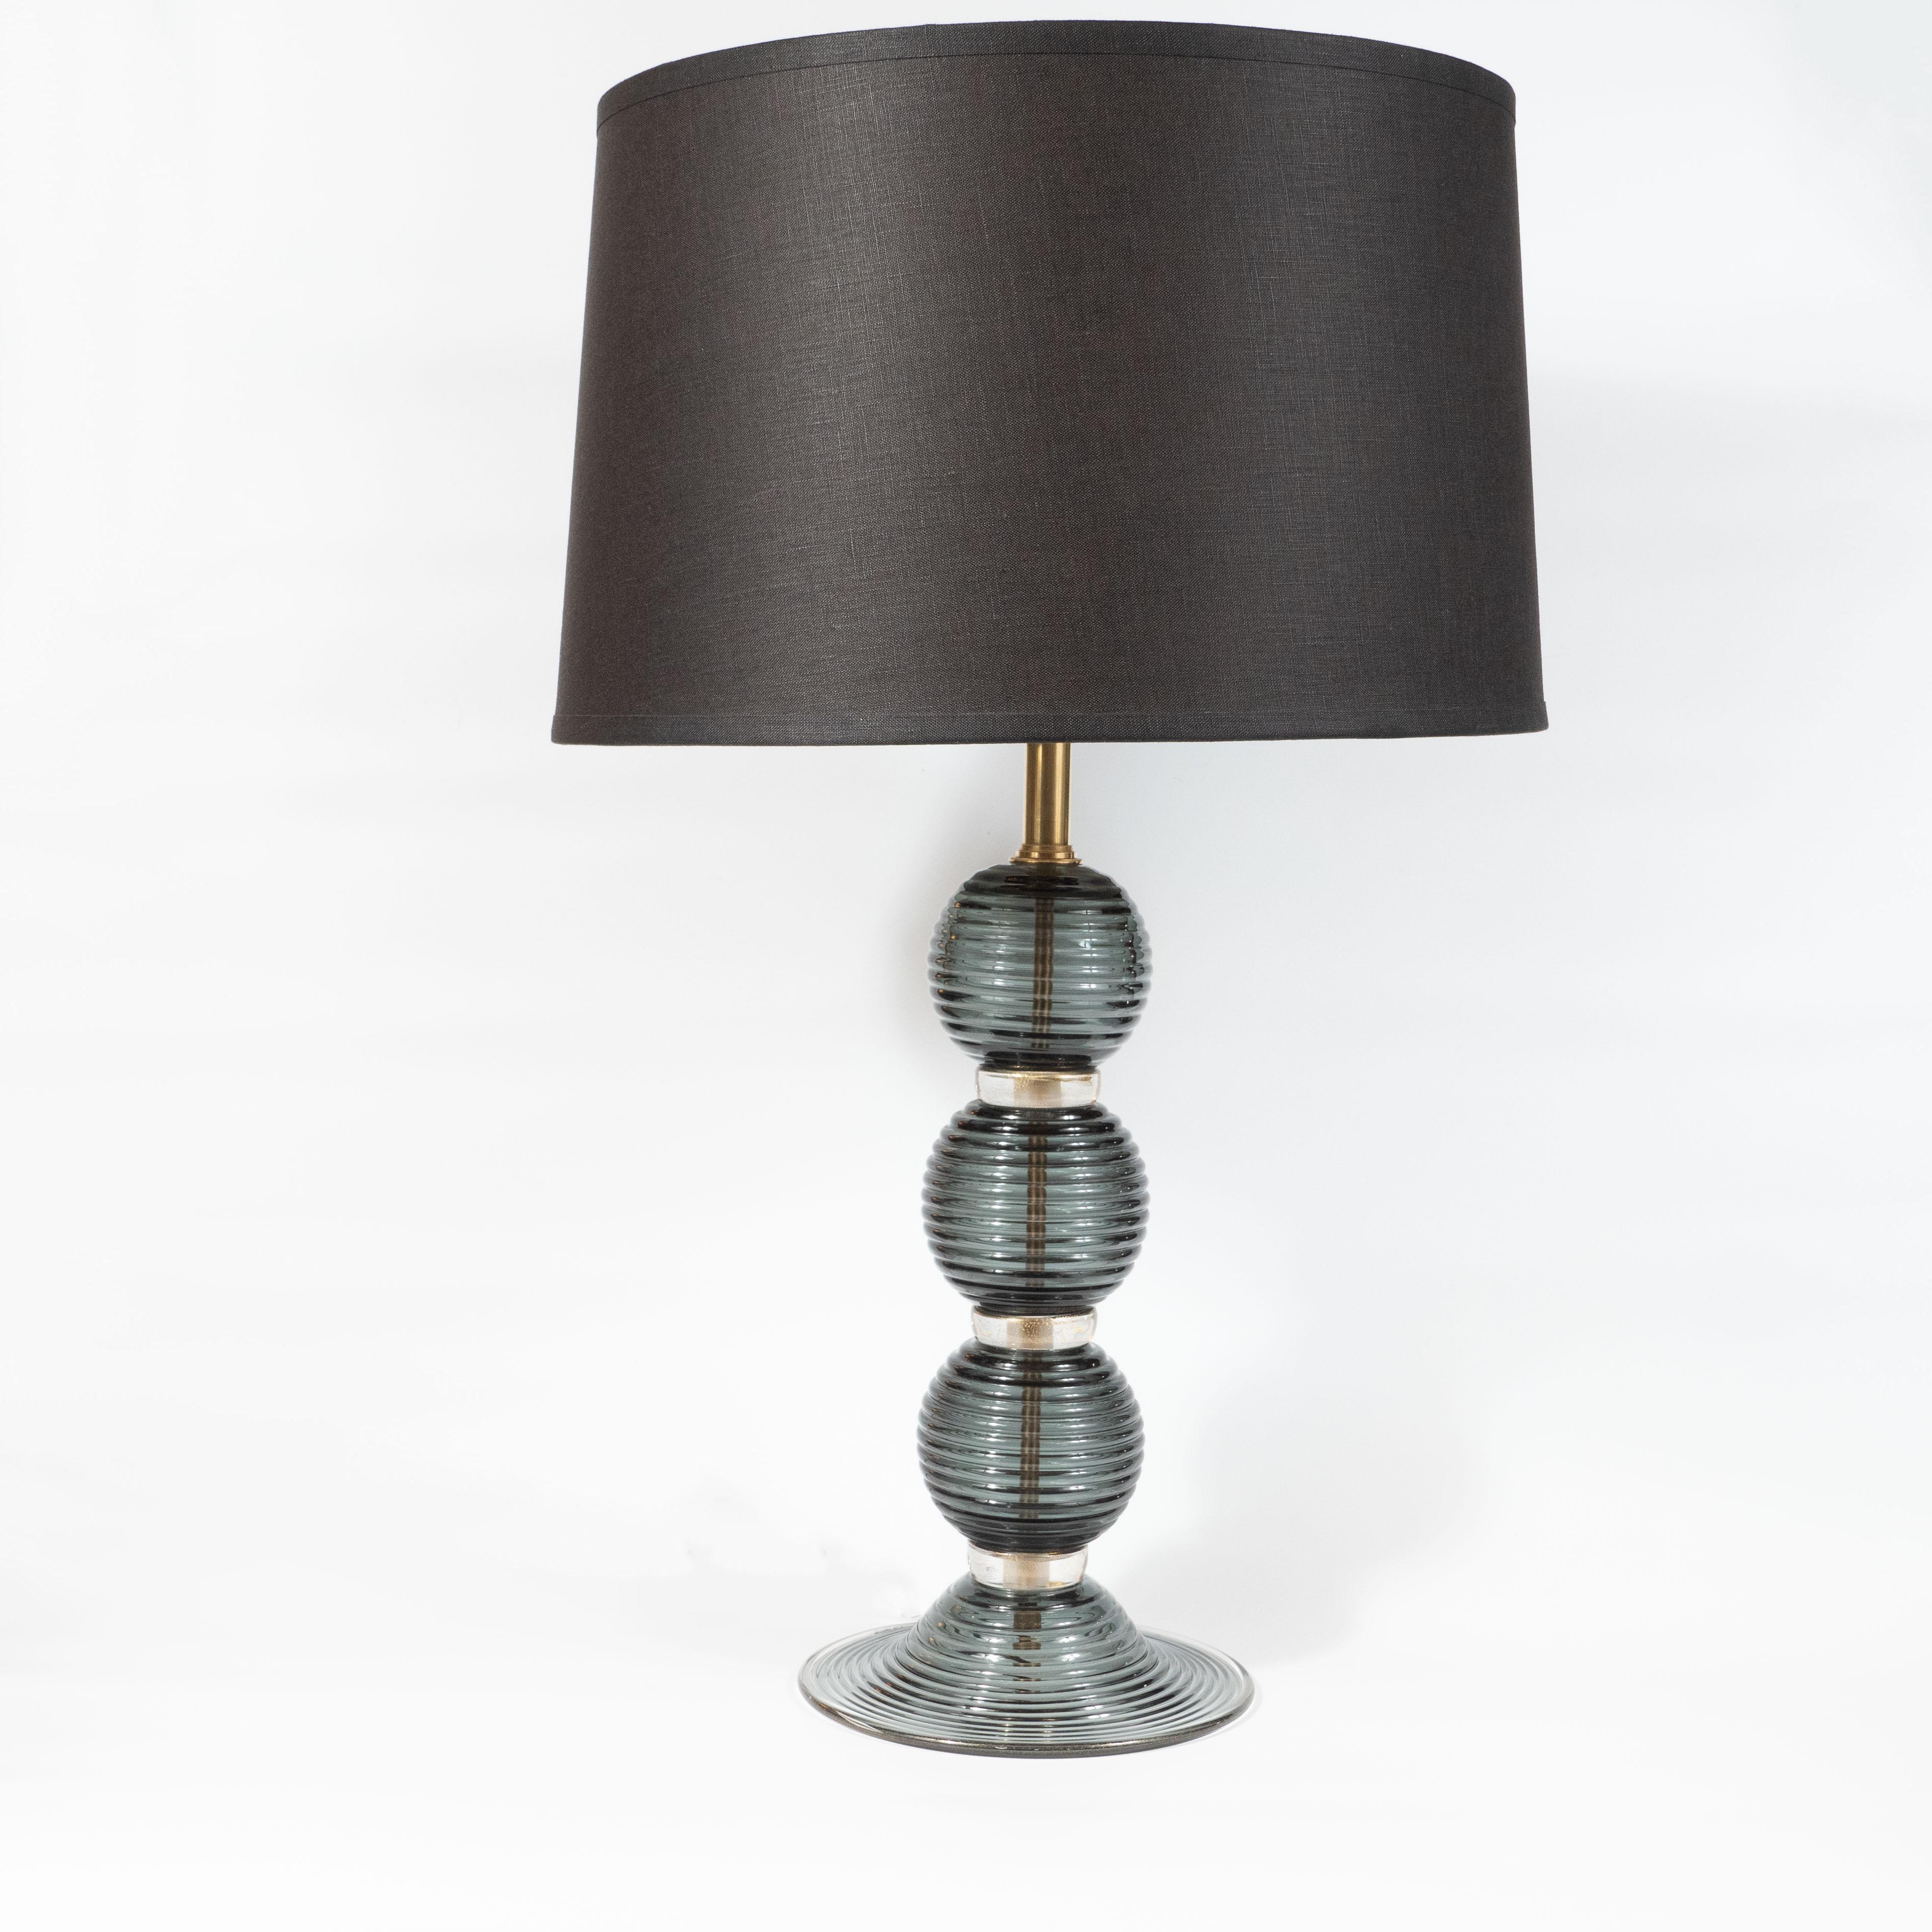 This refined pair of table lamps were realized in Murano, Italy- the islands off the coast of Venice that have been renowned for centuries for their superlative glass production. They feature three orbital forms in semi-opaque smoked graphite glass